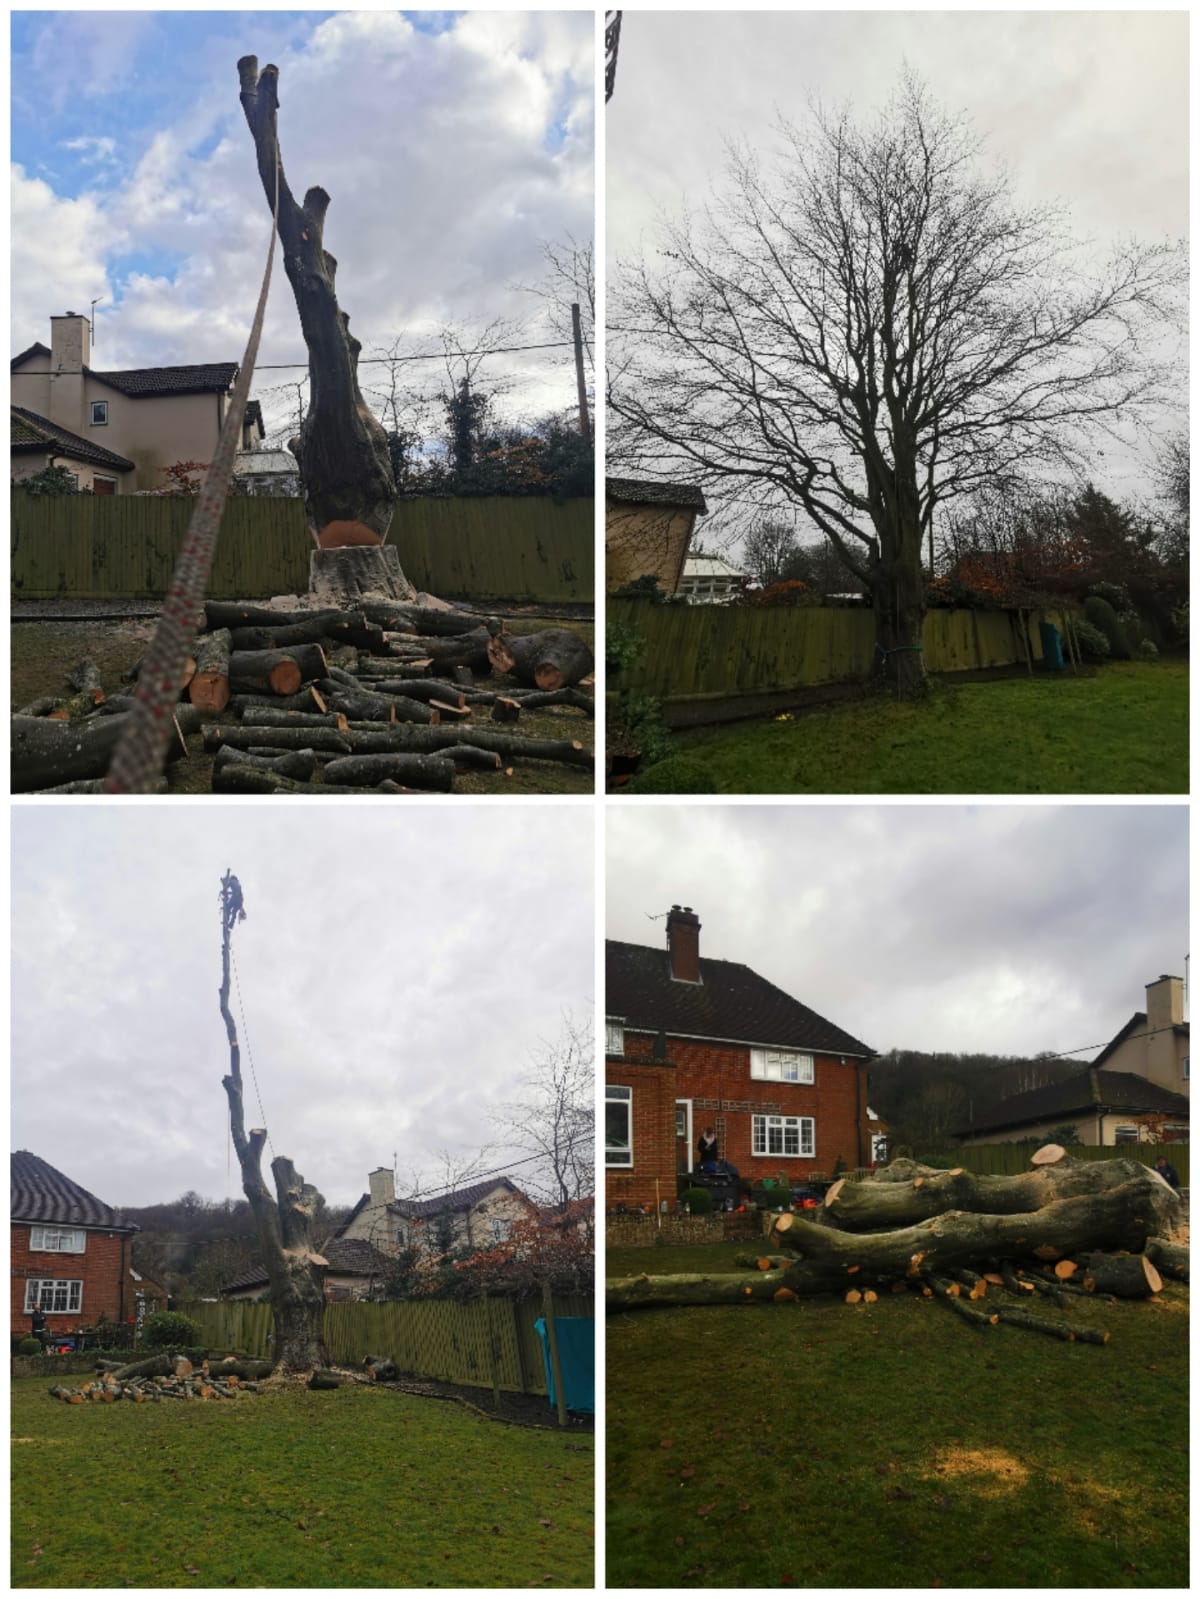 Taking down a beech tree in Fovant, Wiltshire